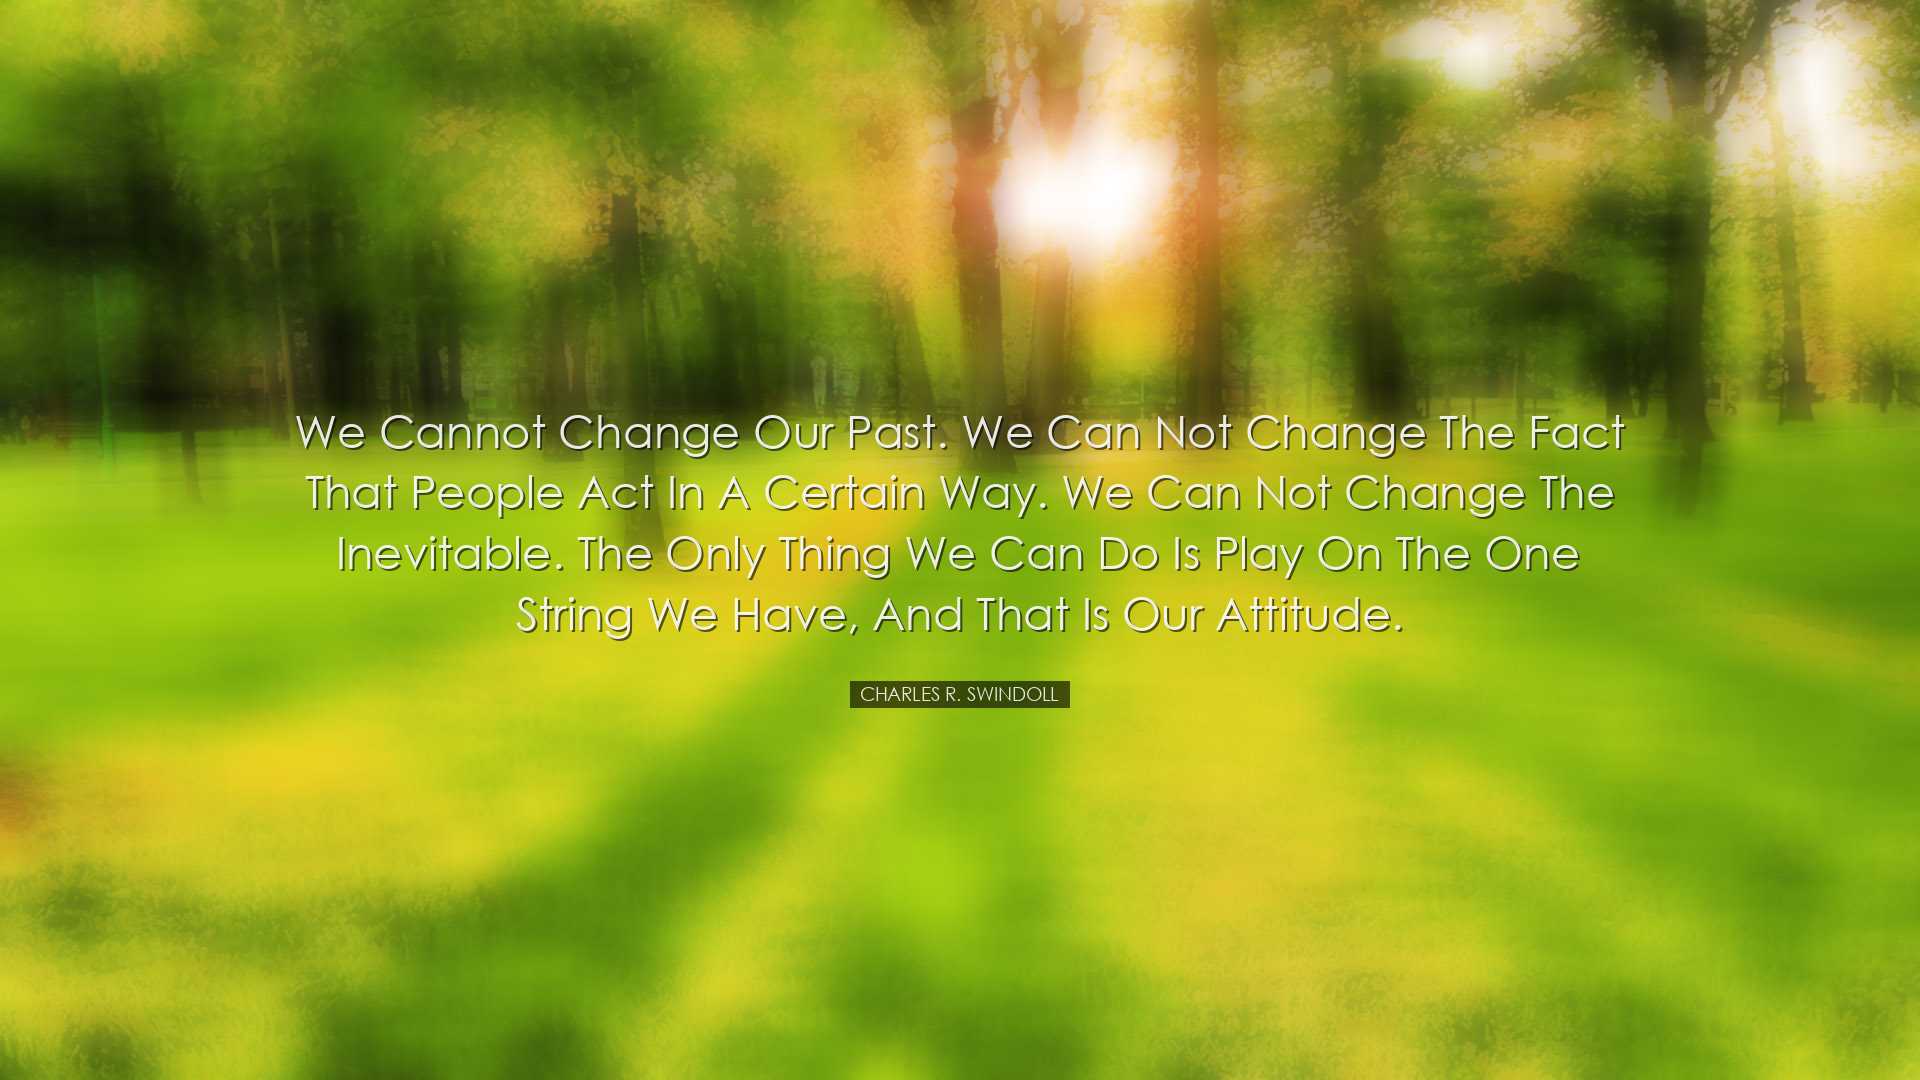 We cannot change our past. We can not change the fact that people